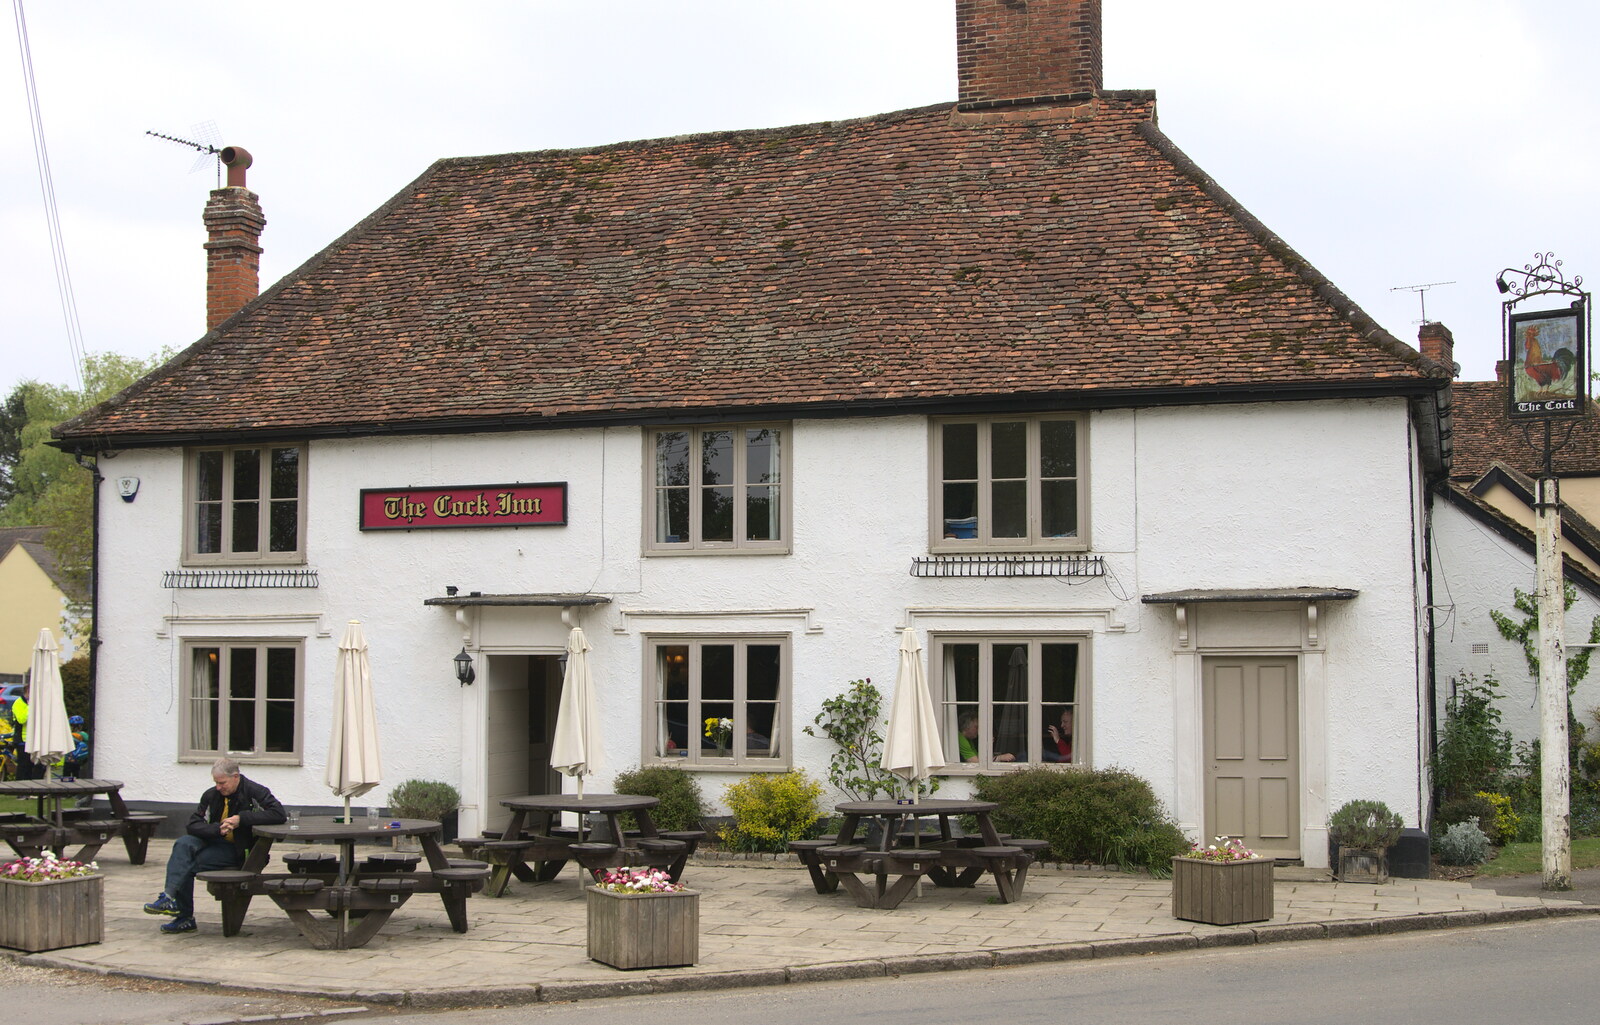 The Cock Inn - the lunch pub at Henham from The Last-Ever BSCC Weekend Away Bike Ride, Thaxted, Essex - 6th May 2017